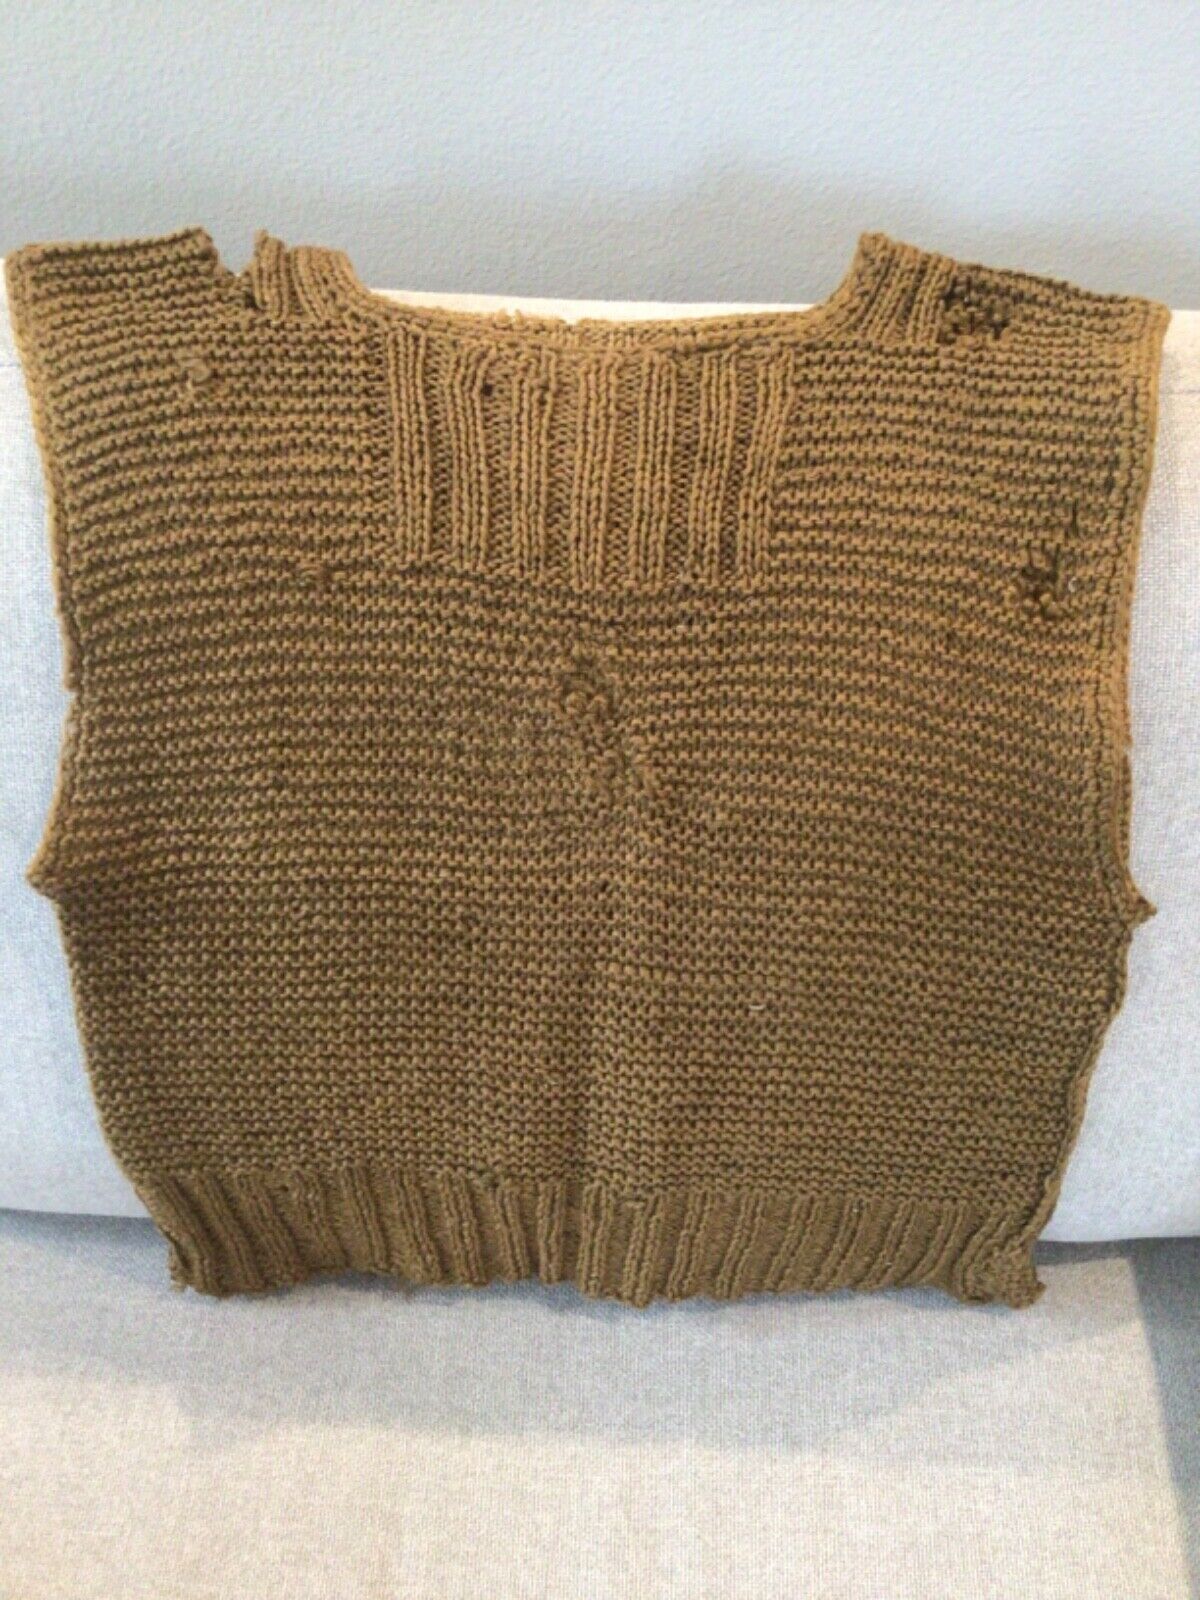 WWI US Army Issue Knitted Sweater Vest - Worn - 1918 - Rare